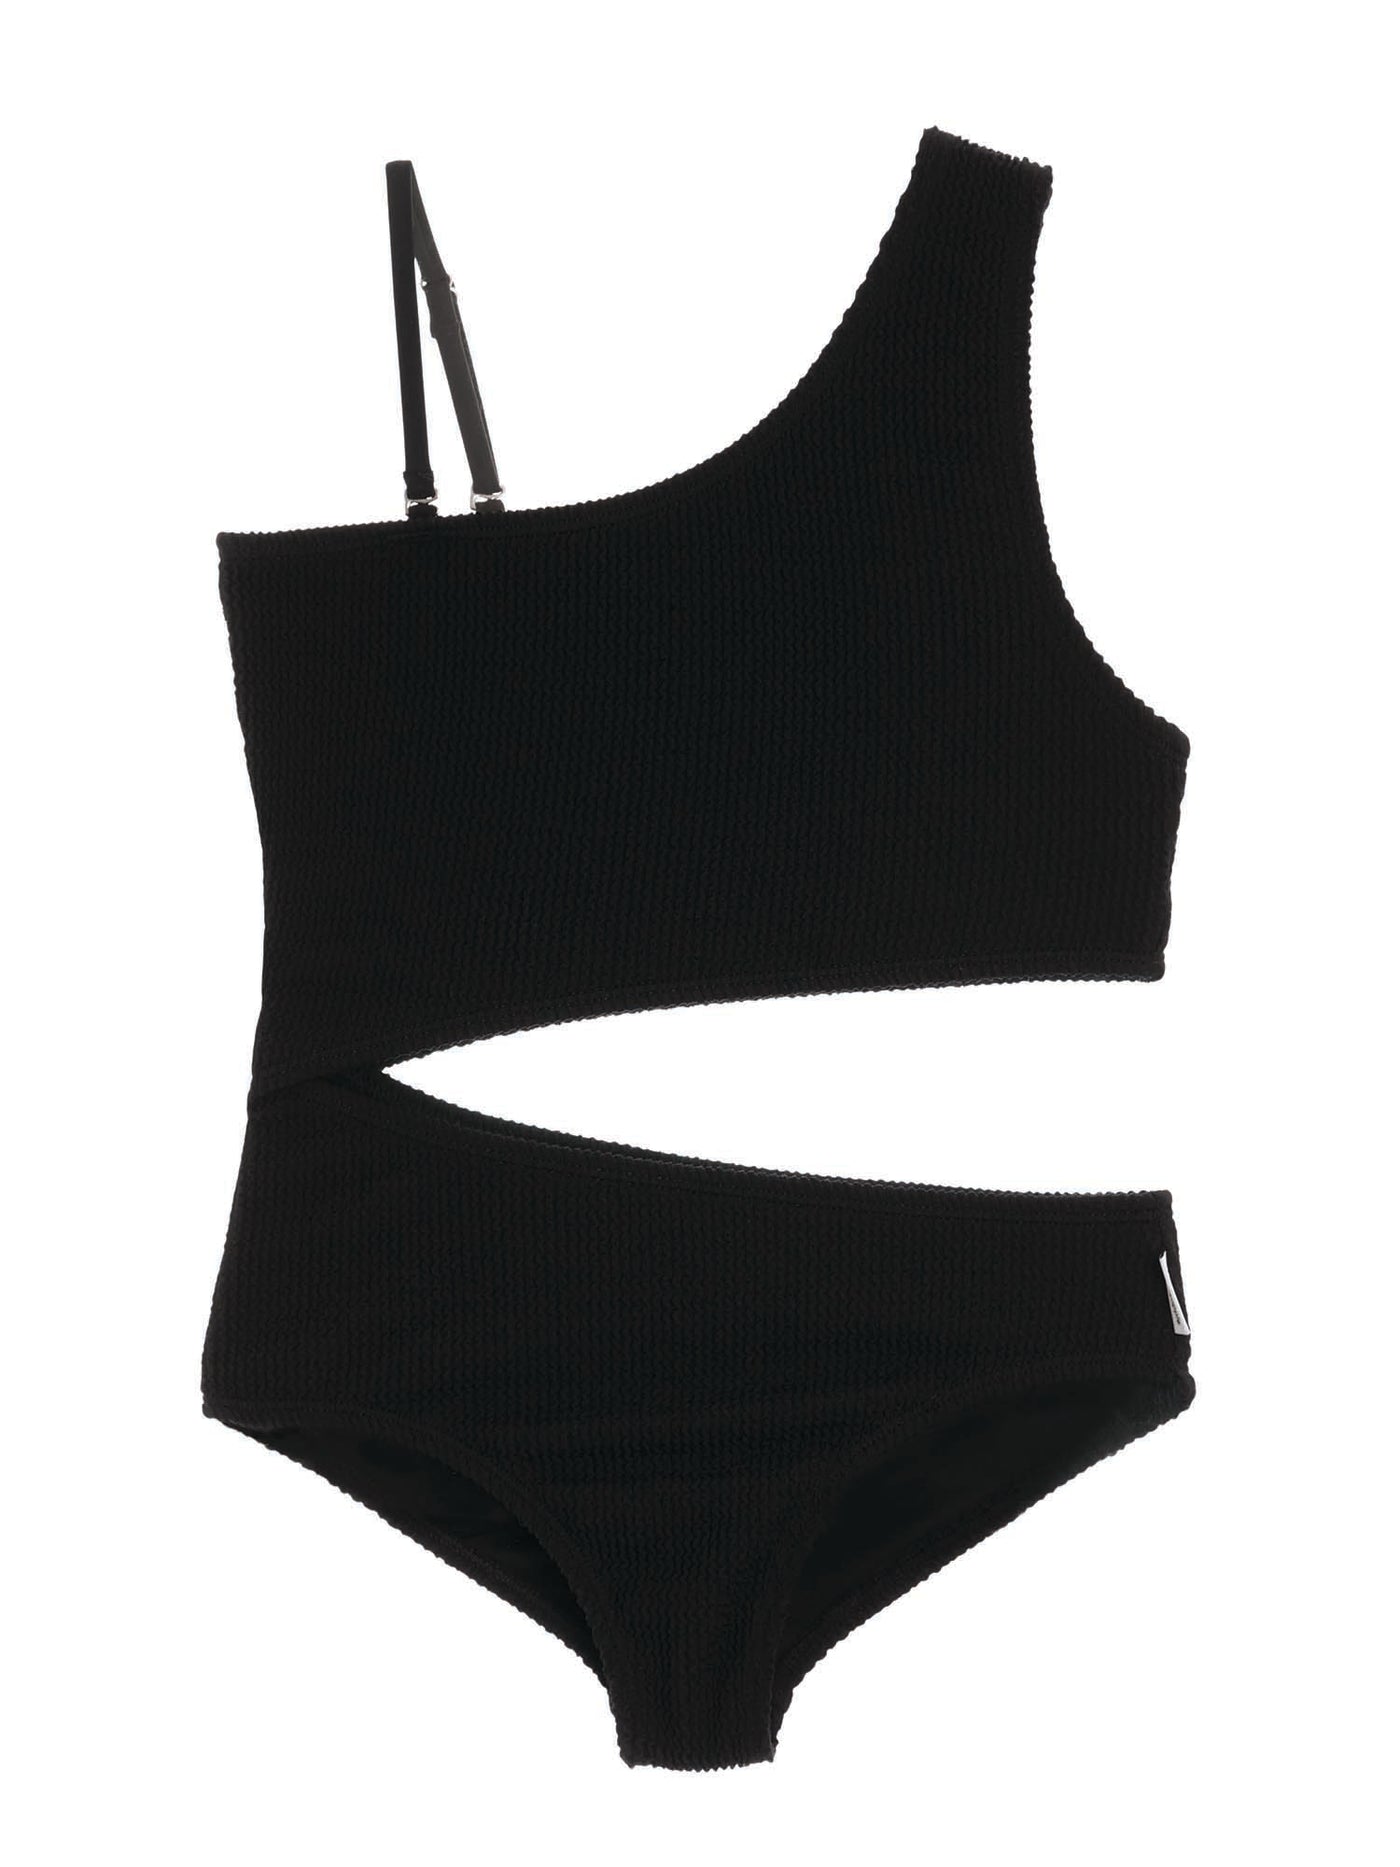 Asymmetrical One Piece Swimsuit with Crinkle Texture Fabric (Athena)